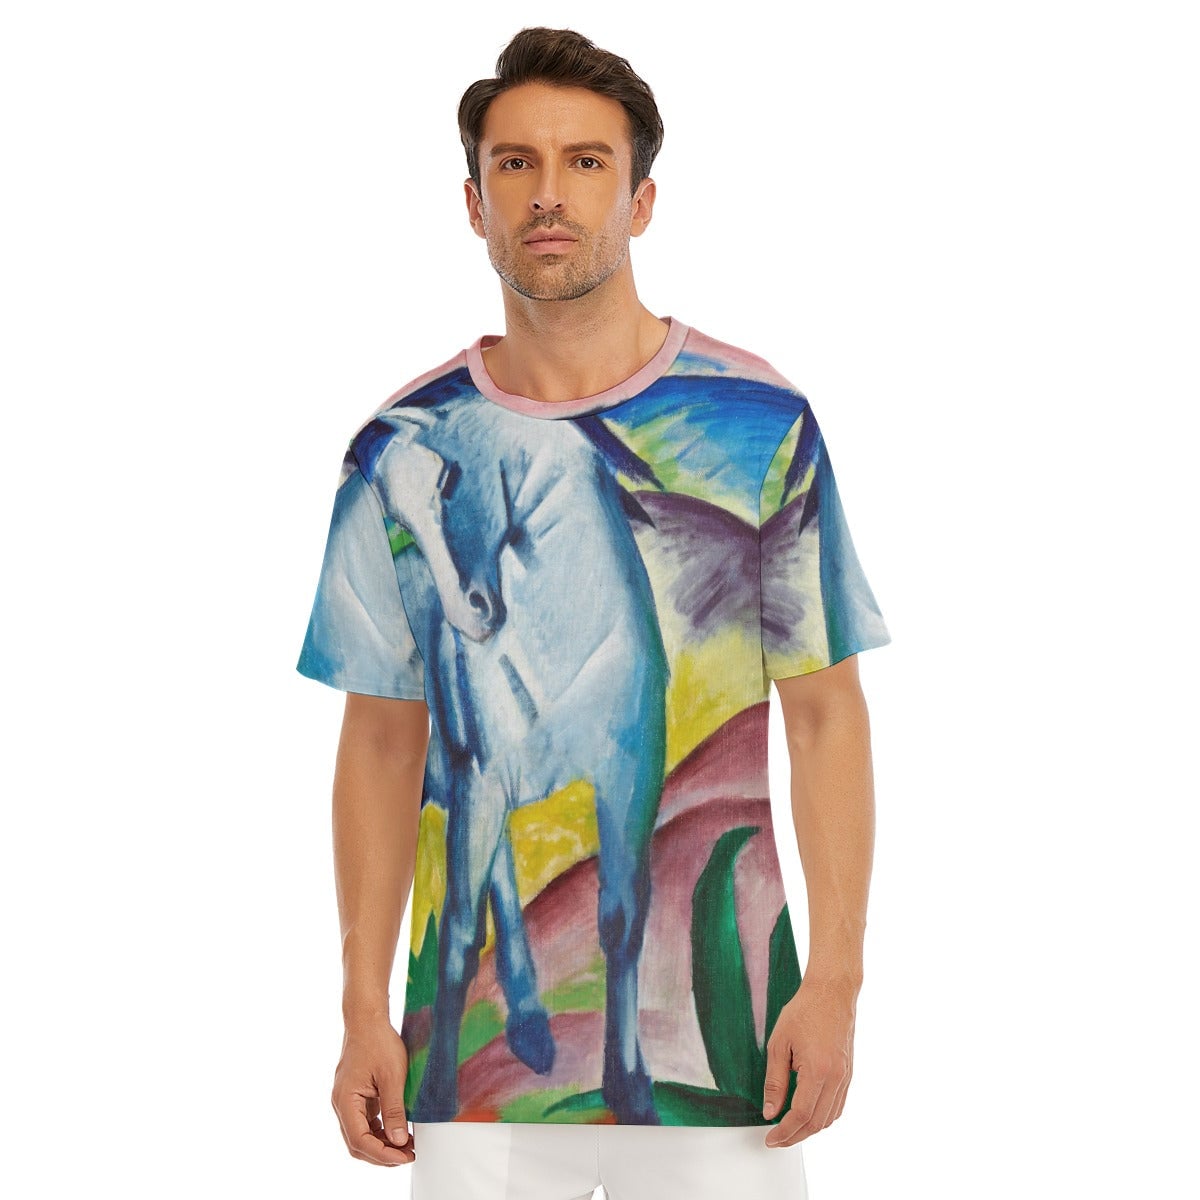 Franz Marc’s Blue Horse I T-Shirt - Famous Painting Tee